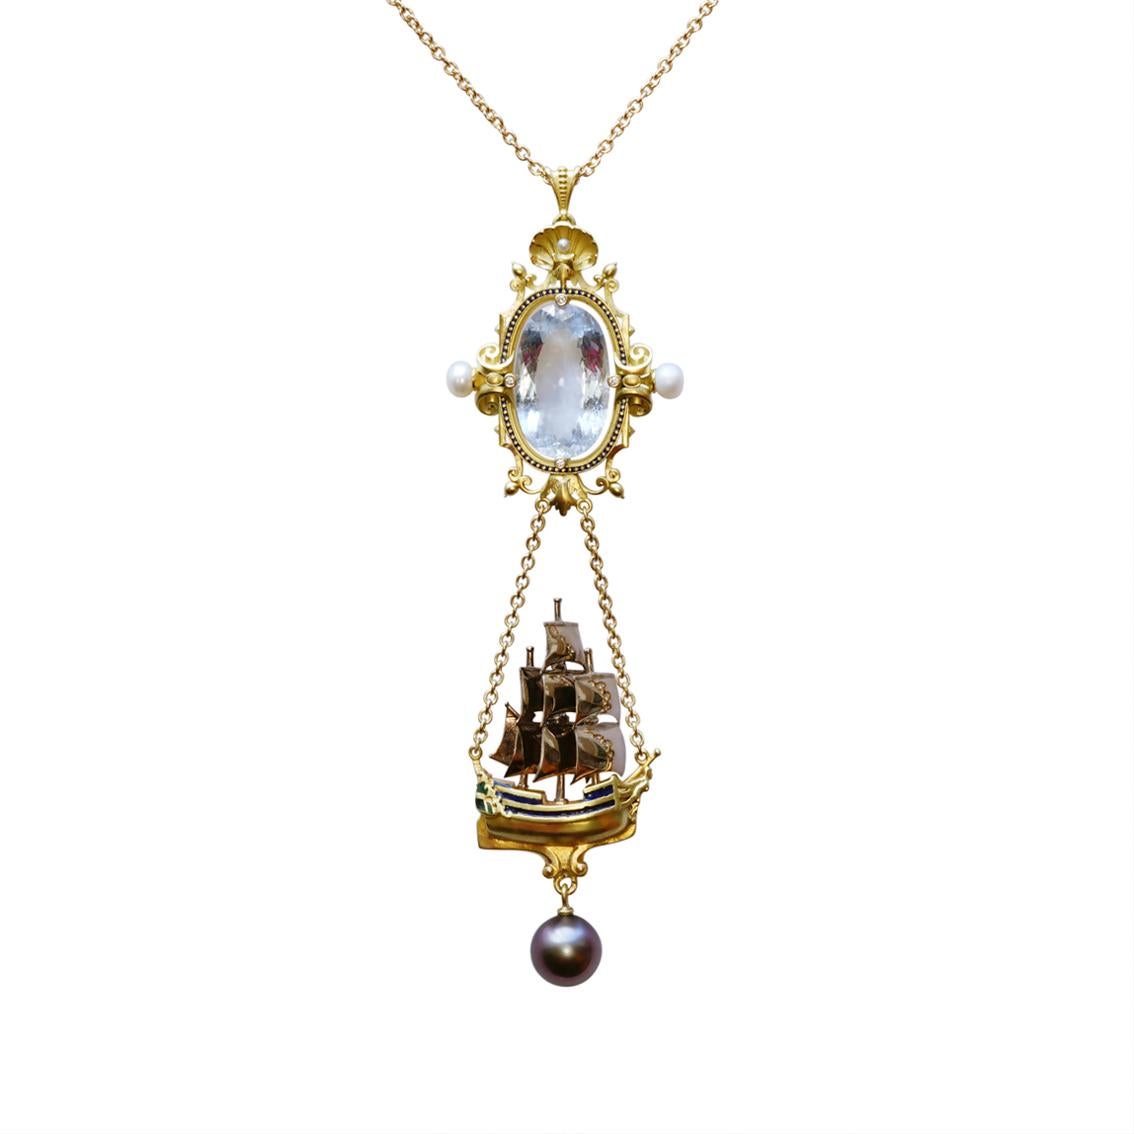 18kt Yellow, Rose, & White Gold Ship Pendant Necklace with Aquamarine, White Diamonds, Tahitian Pearl, White Freshwater Pearls and Vitreous Enamel on an 18kt Yellow Gold Oval Trace Chain (18